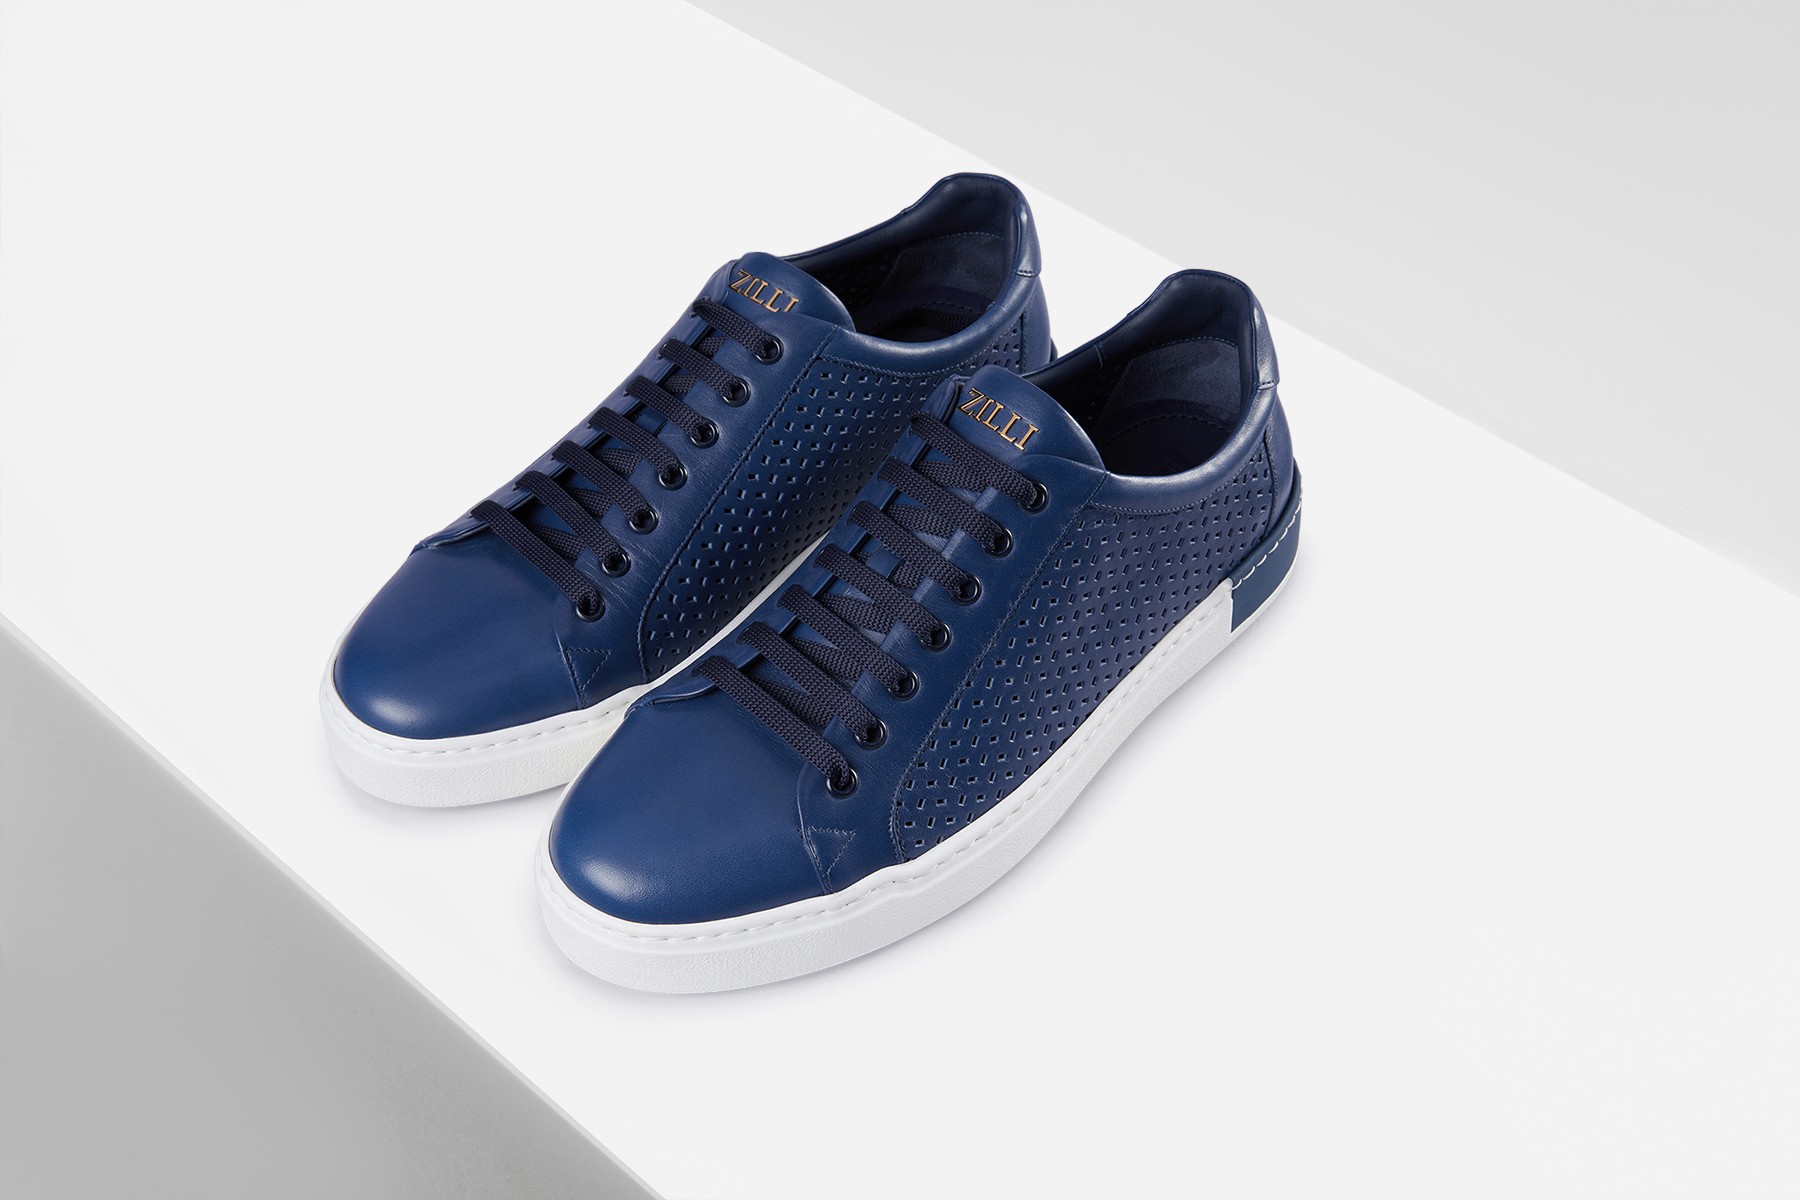 Royal blue sneakers in calfskin and perforated calfskin